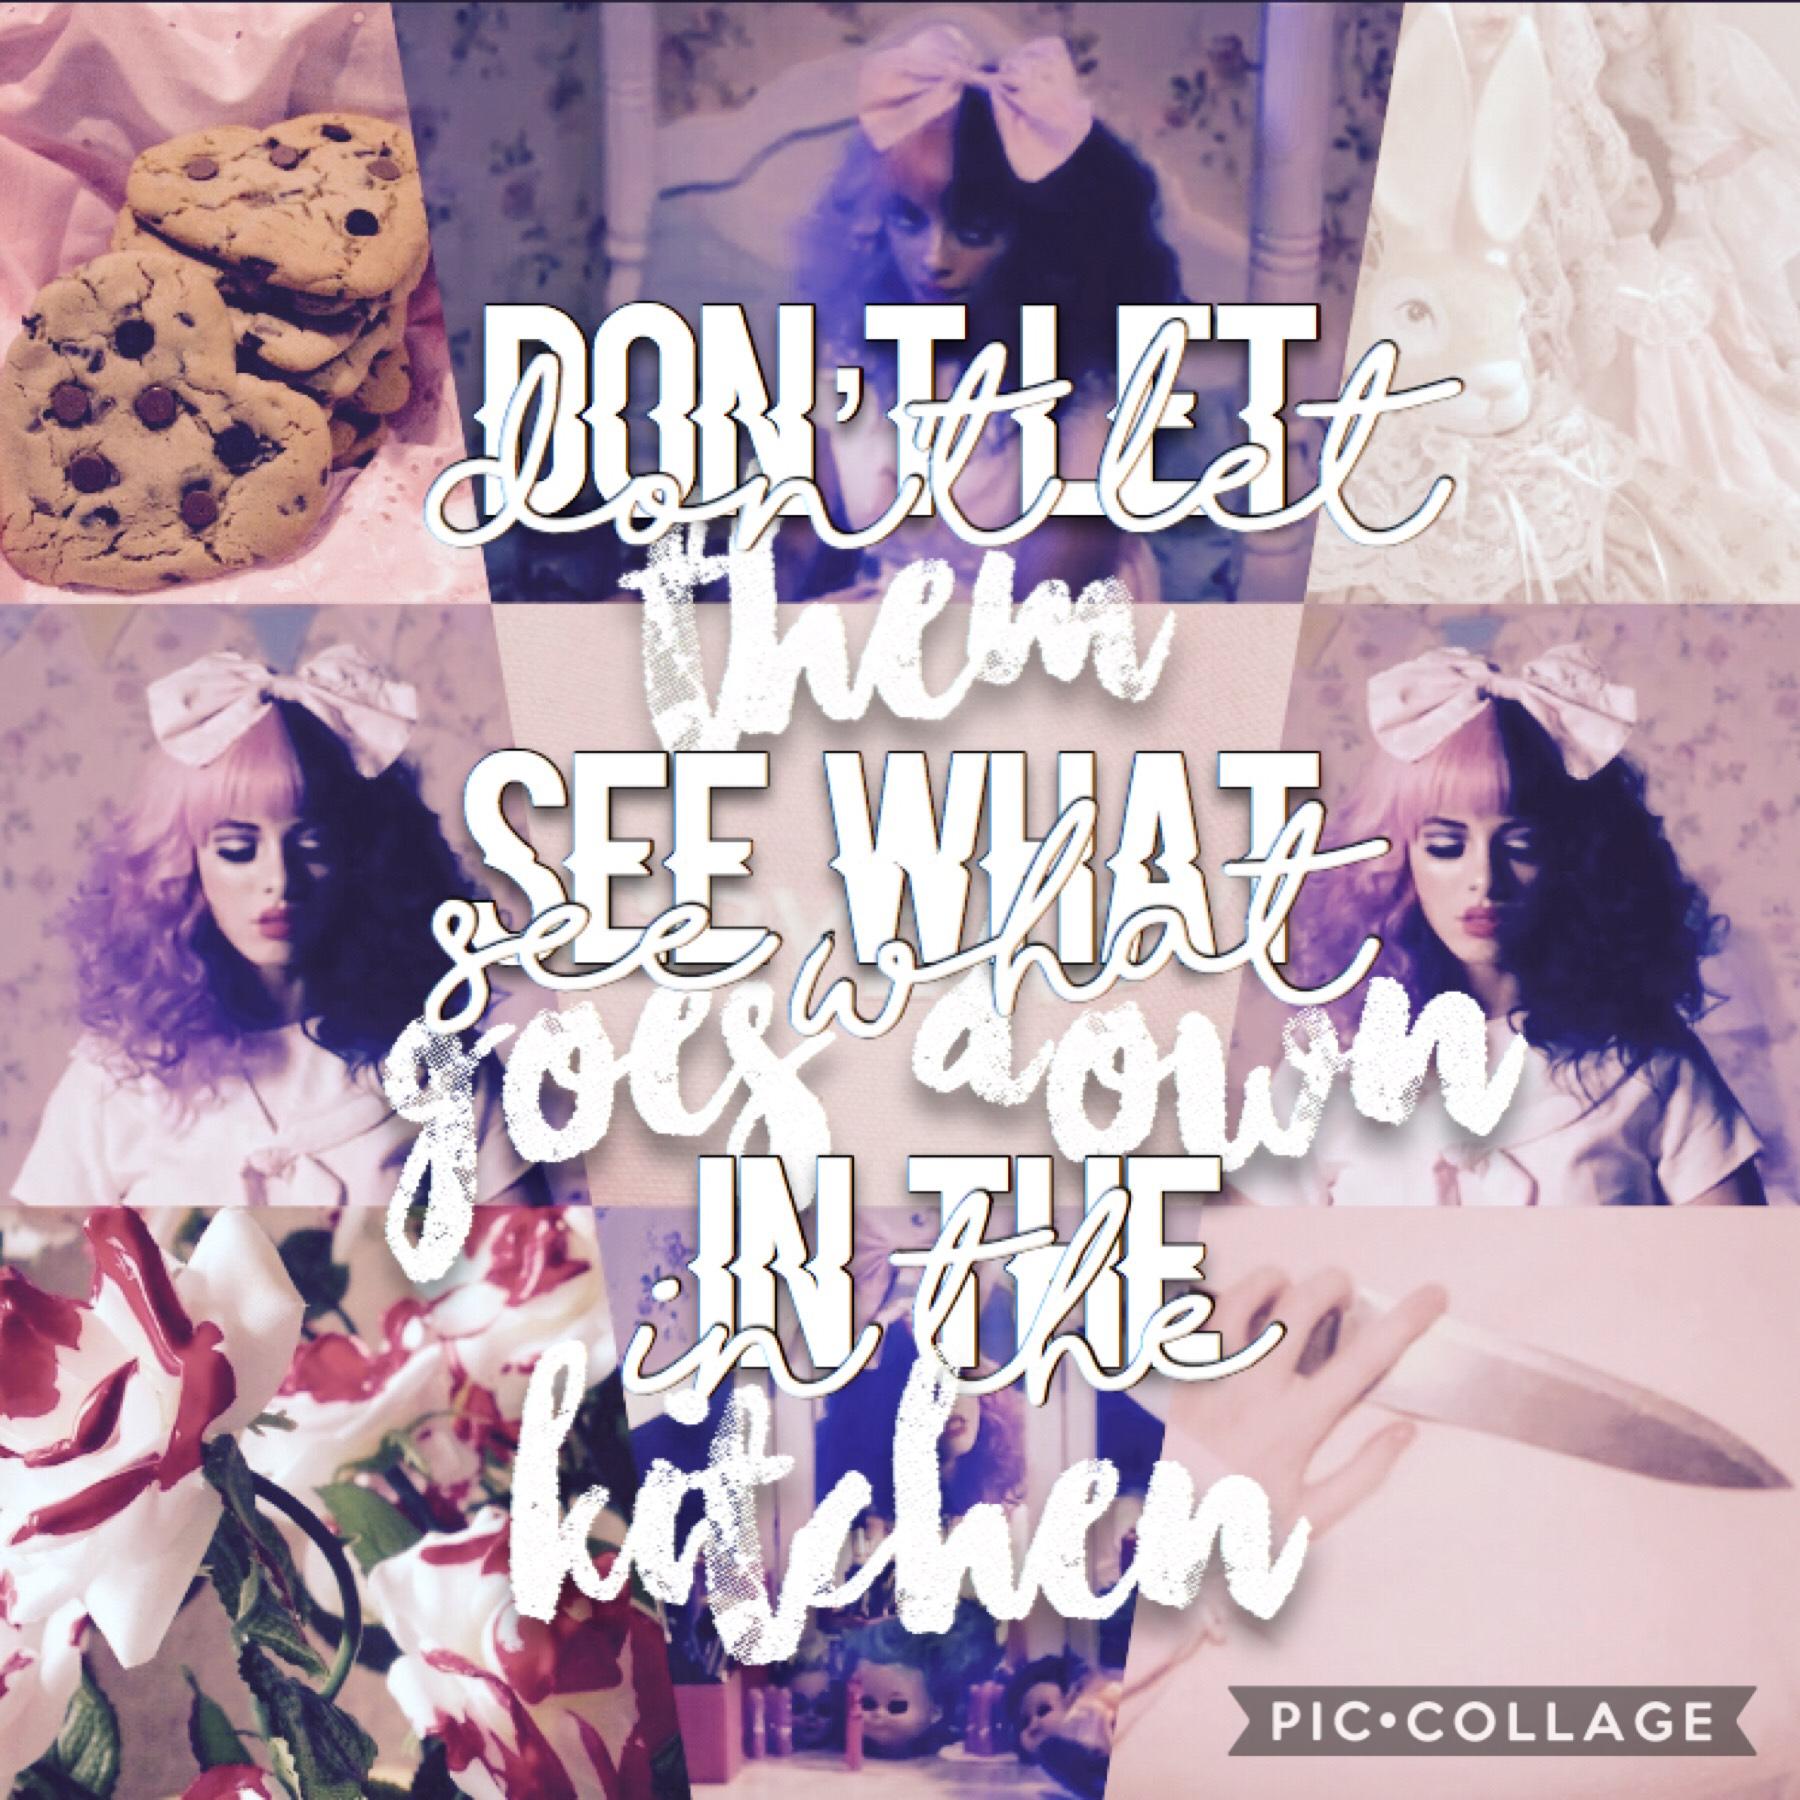 TAP
mELANIE MARTINEZ EDIT CAUSE I LOVE HER I KNOW EVERY SONG BY HEART SHE WAS MY FIRST FAVORITE SINGER

playlist: Dollhouse by Melanie Martinez
Bohemian Rhapsody by Queen (Brendon Urie Cover)